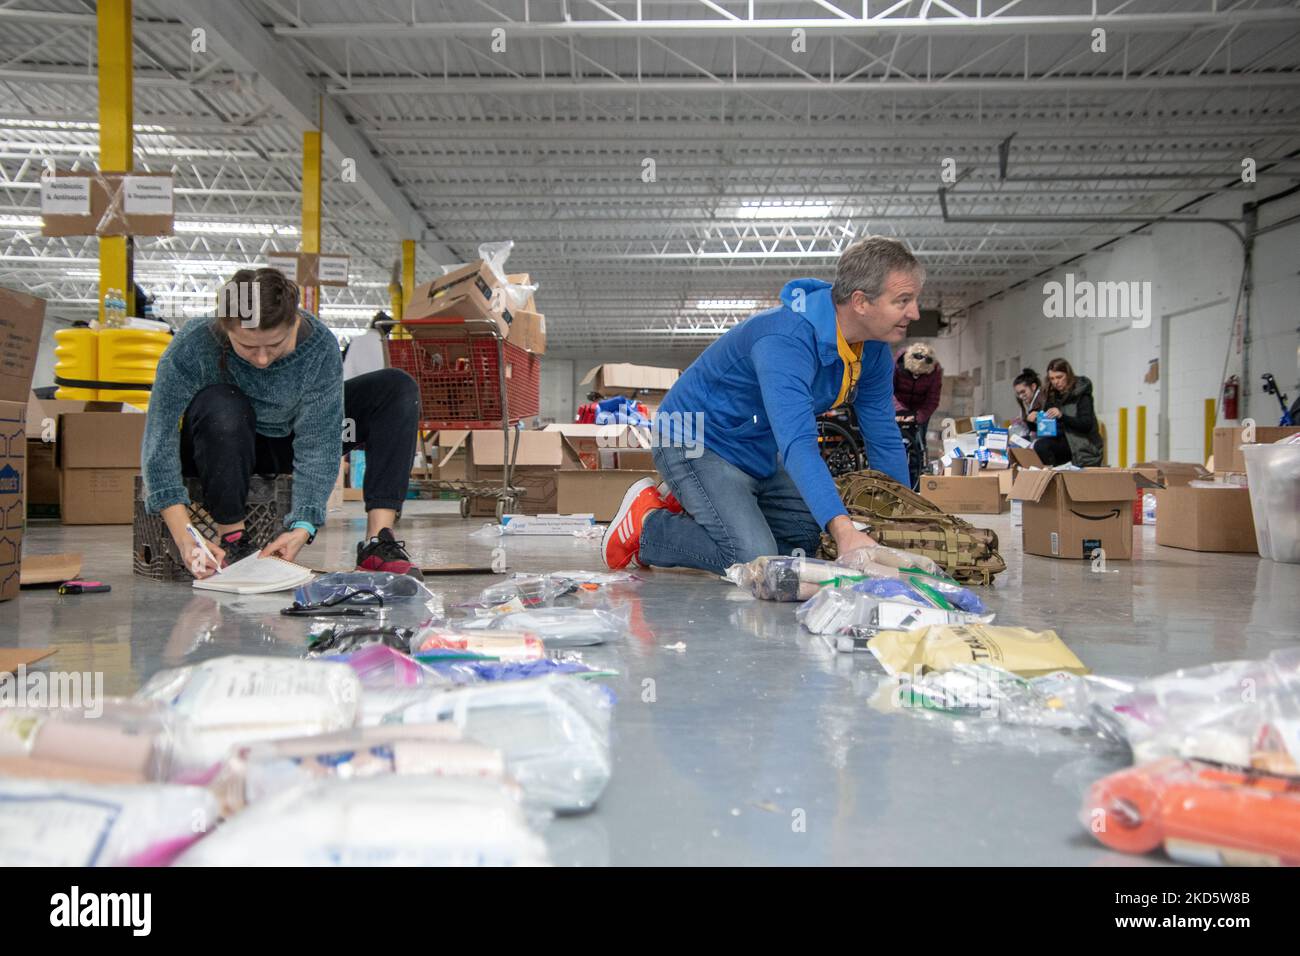 Volunteers with the Ukrainian-American Crisis Response Committee pack field medic bags on March 20, 2022 at Standard Trucking in Hamtramck, Michigan. The medical equipment will be shipped overseas to civilians and military personnel in Ukraine in the coming days. (Photo by Adam J. Dewey/NurPhoto) Stock Photo